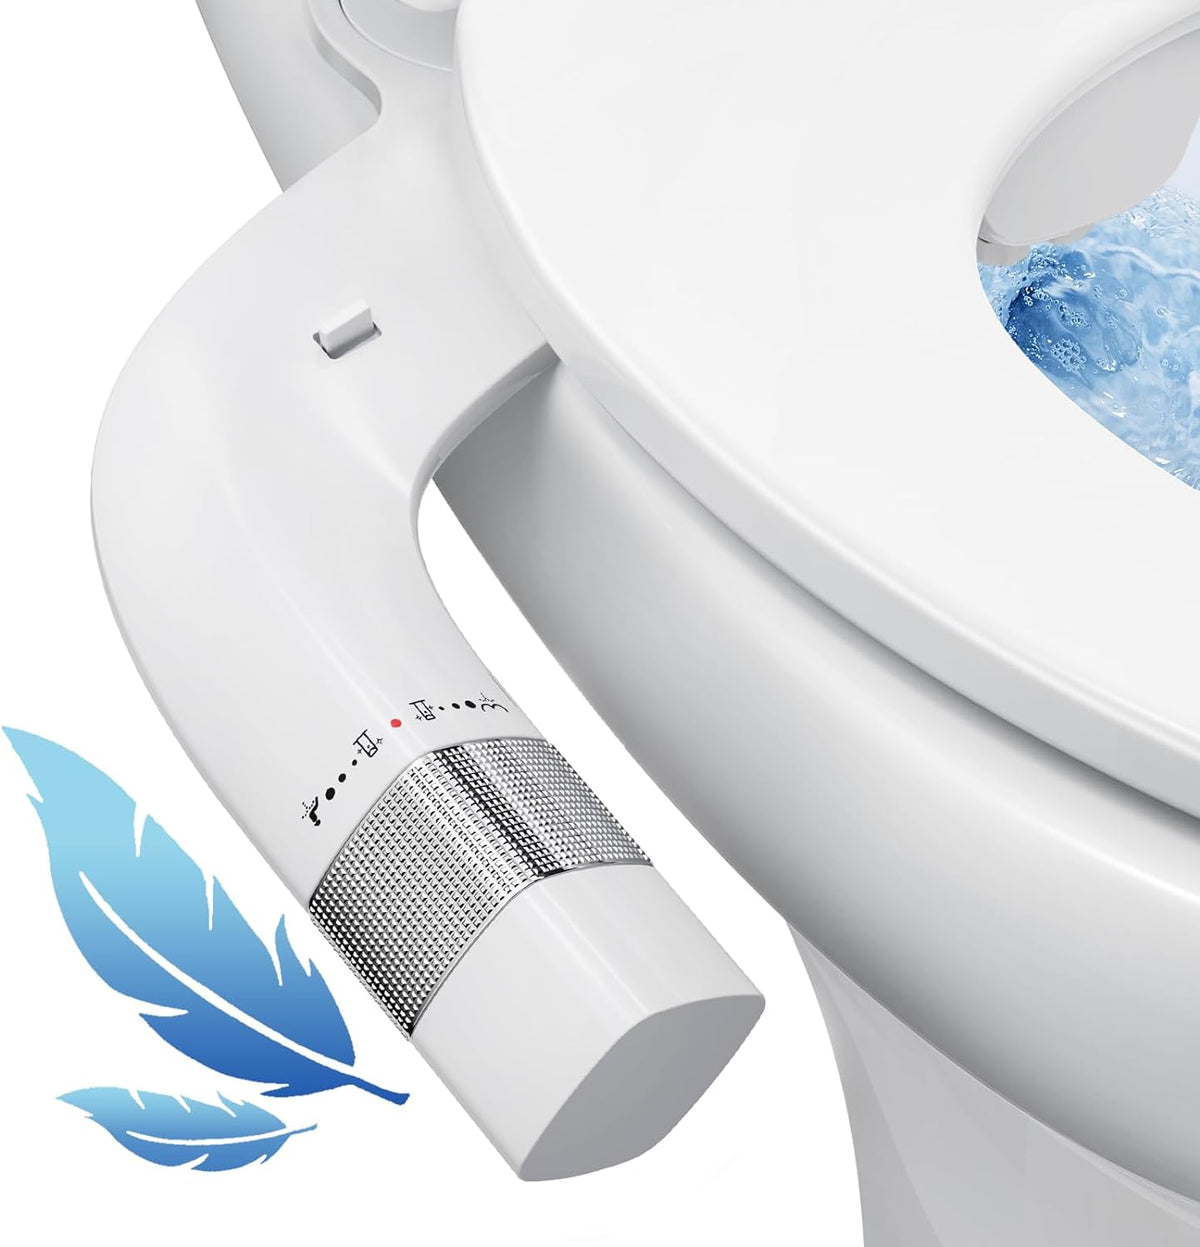 Veken Ultra-Slim Bidet Attachment for Toilet, Non Electric Dual Nozzle (Posterior/Feminine Wash) Hygienic Bidets Existing Toilets Seat, Adjustable Angle Water Pressure, Self Clean, Water Sprayer Baday - aborderproducts